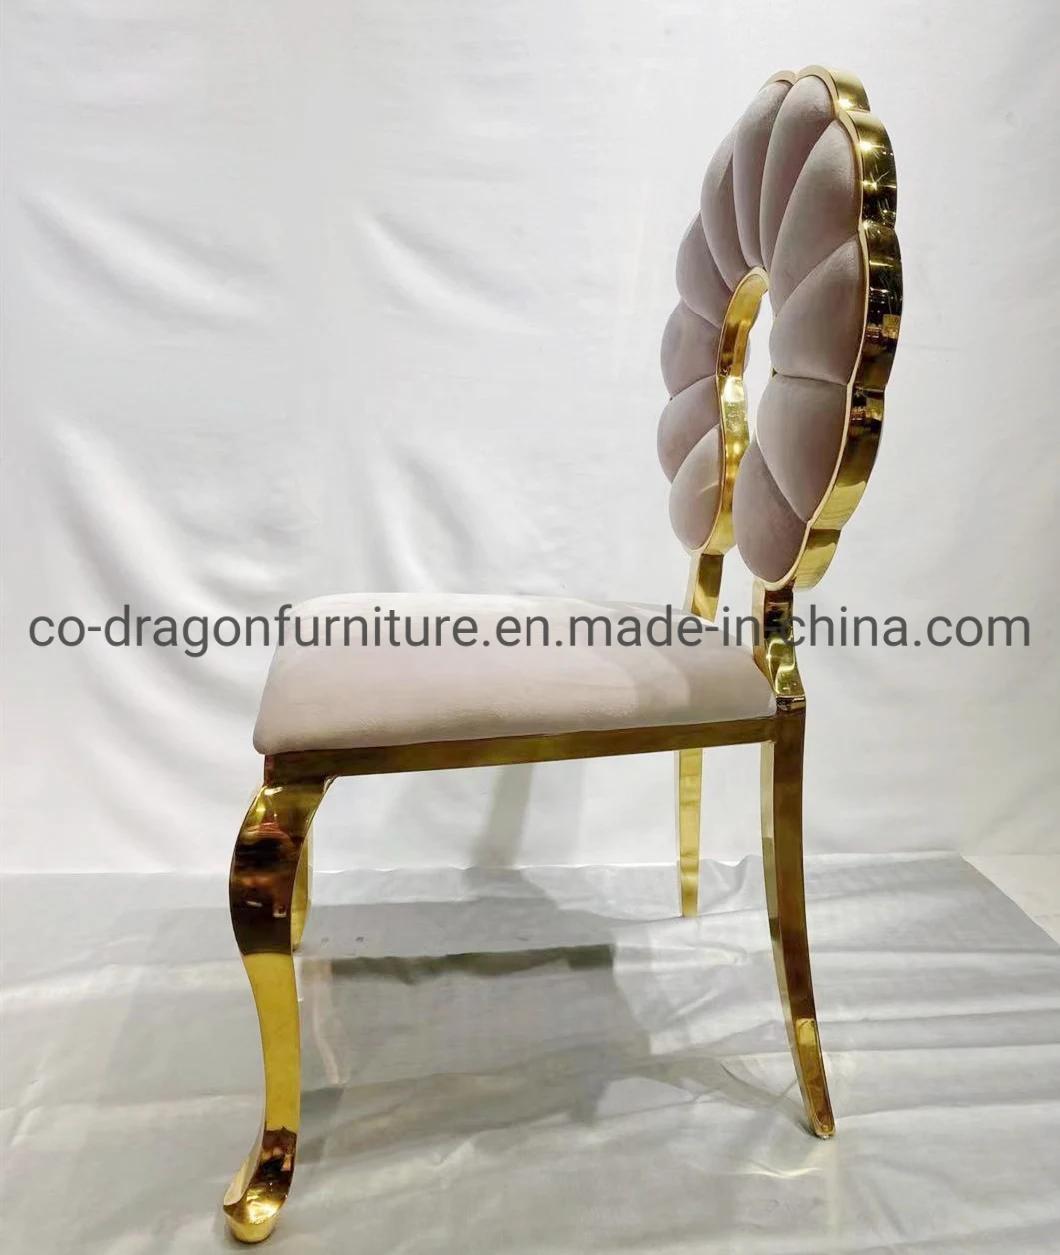 Fashion Gold Stainless Steel Leather Dining Chair for Dining Furniture